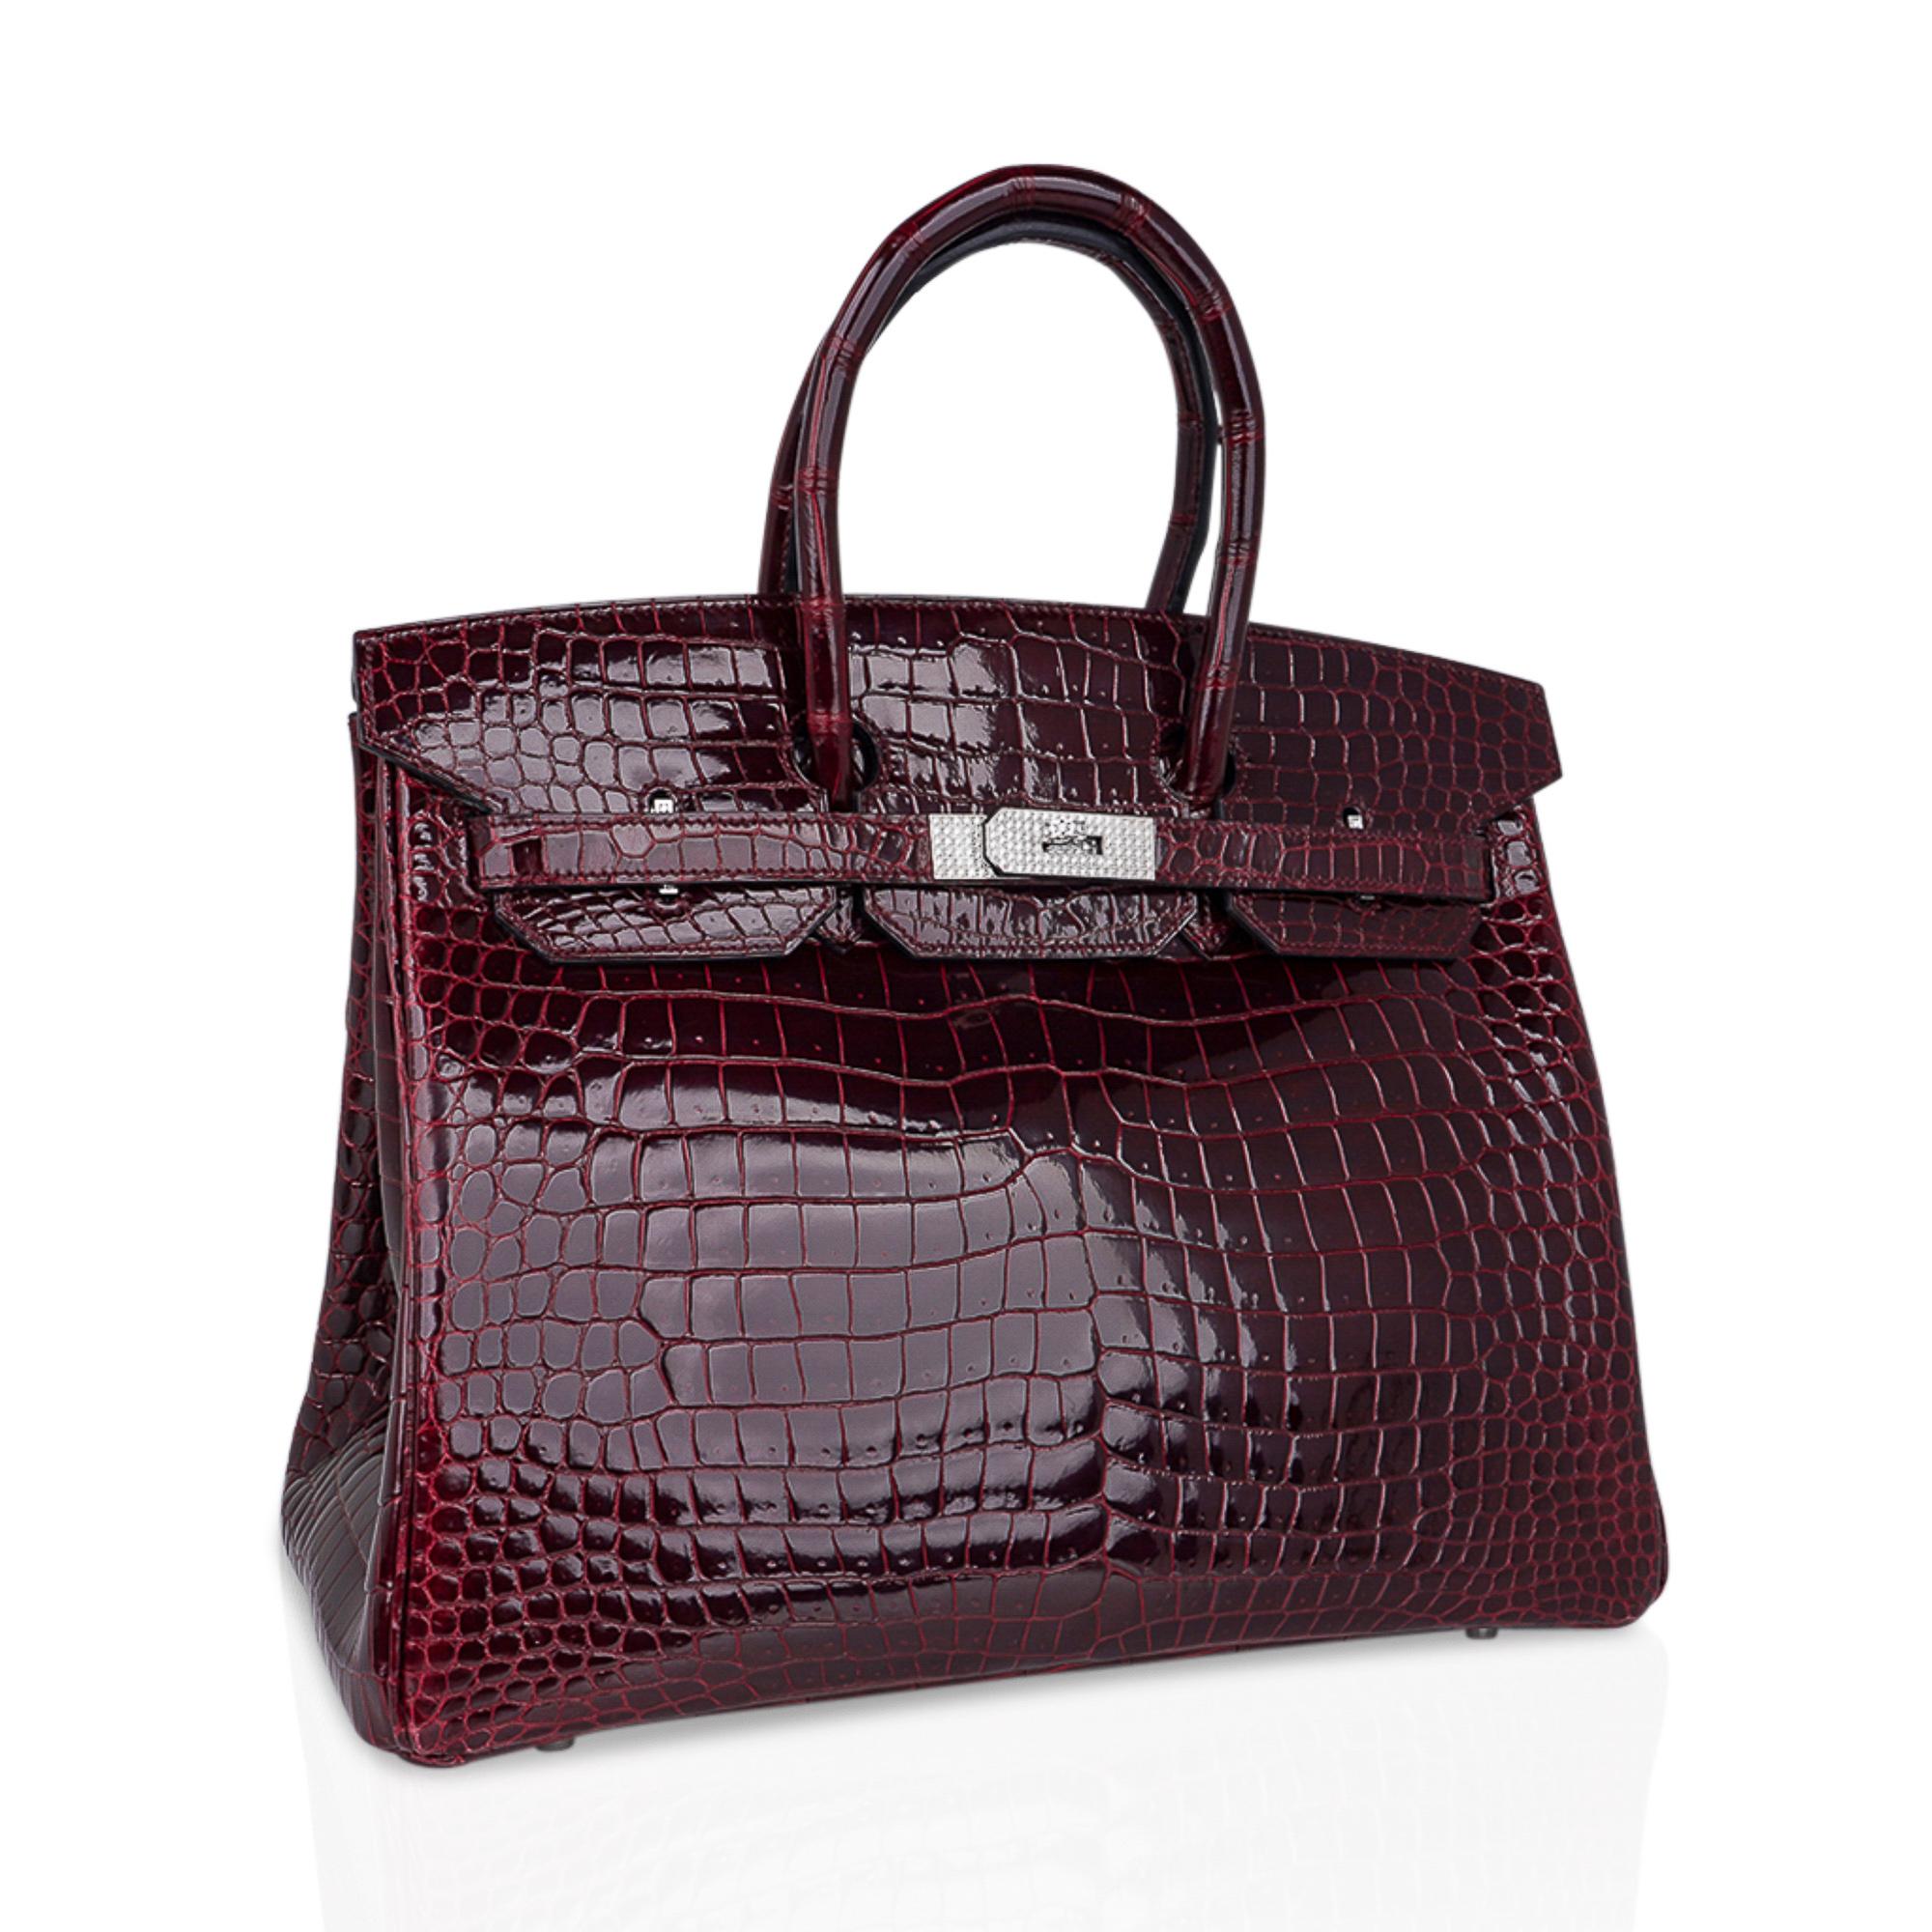 Mightychic offers an exceptional Hermes Birkin 35 Diamond Porosus Crocodile bag featured in jewel toned Bordeaux.
Exquisite and rare color, this Hermes Birkin bag with 18K White Gold hardware is set with 10.23 diamonds.
Hermes diamonds are ethically